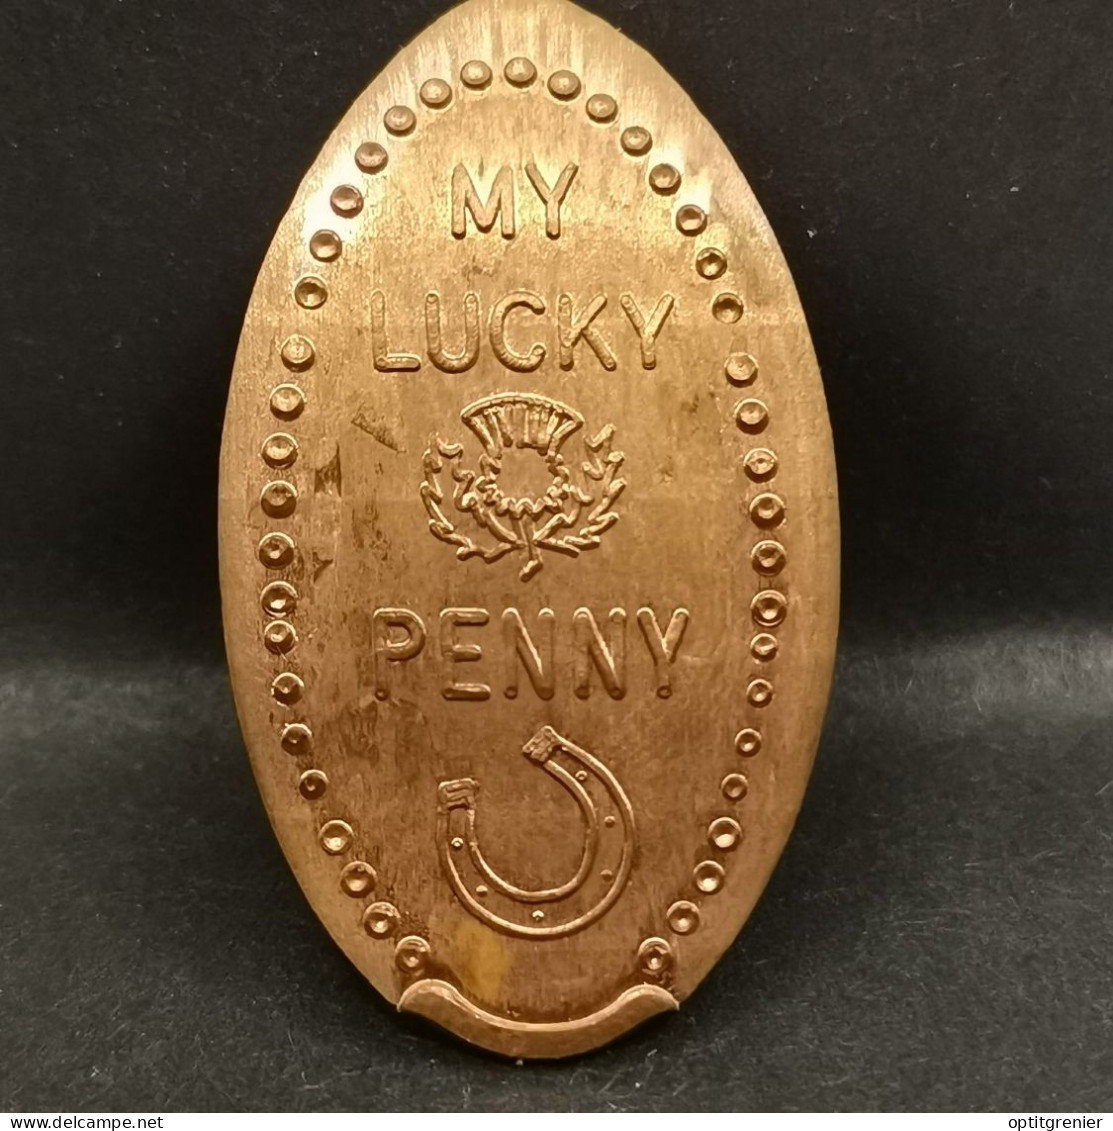 PIECE ECRASEE MY LUCKY PENNY / ELONGATED COIN - Monete Allungate (penny Souvenirs)